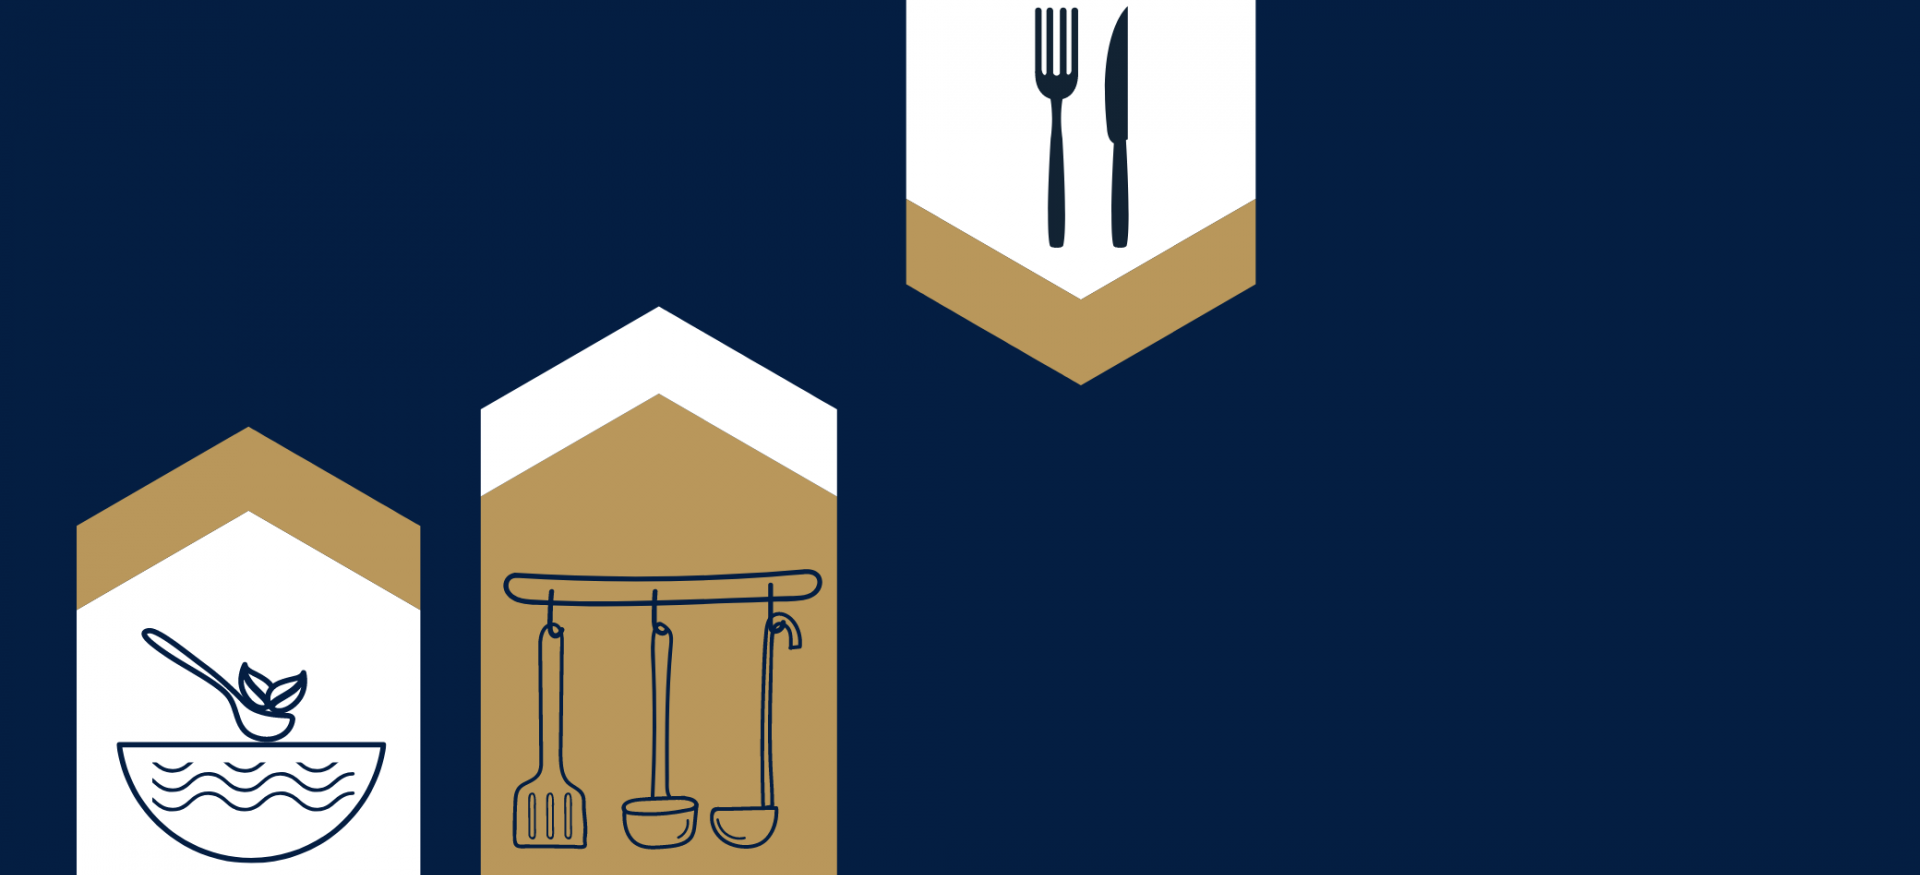 A graphic in dark blue with outlines of a cooking pot and a chopping board with knife and vegetables.